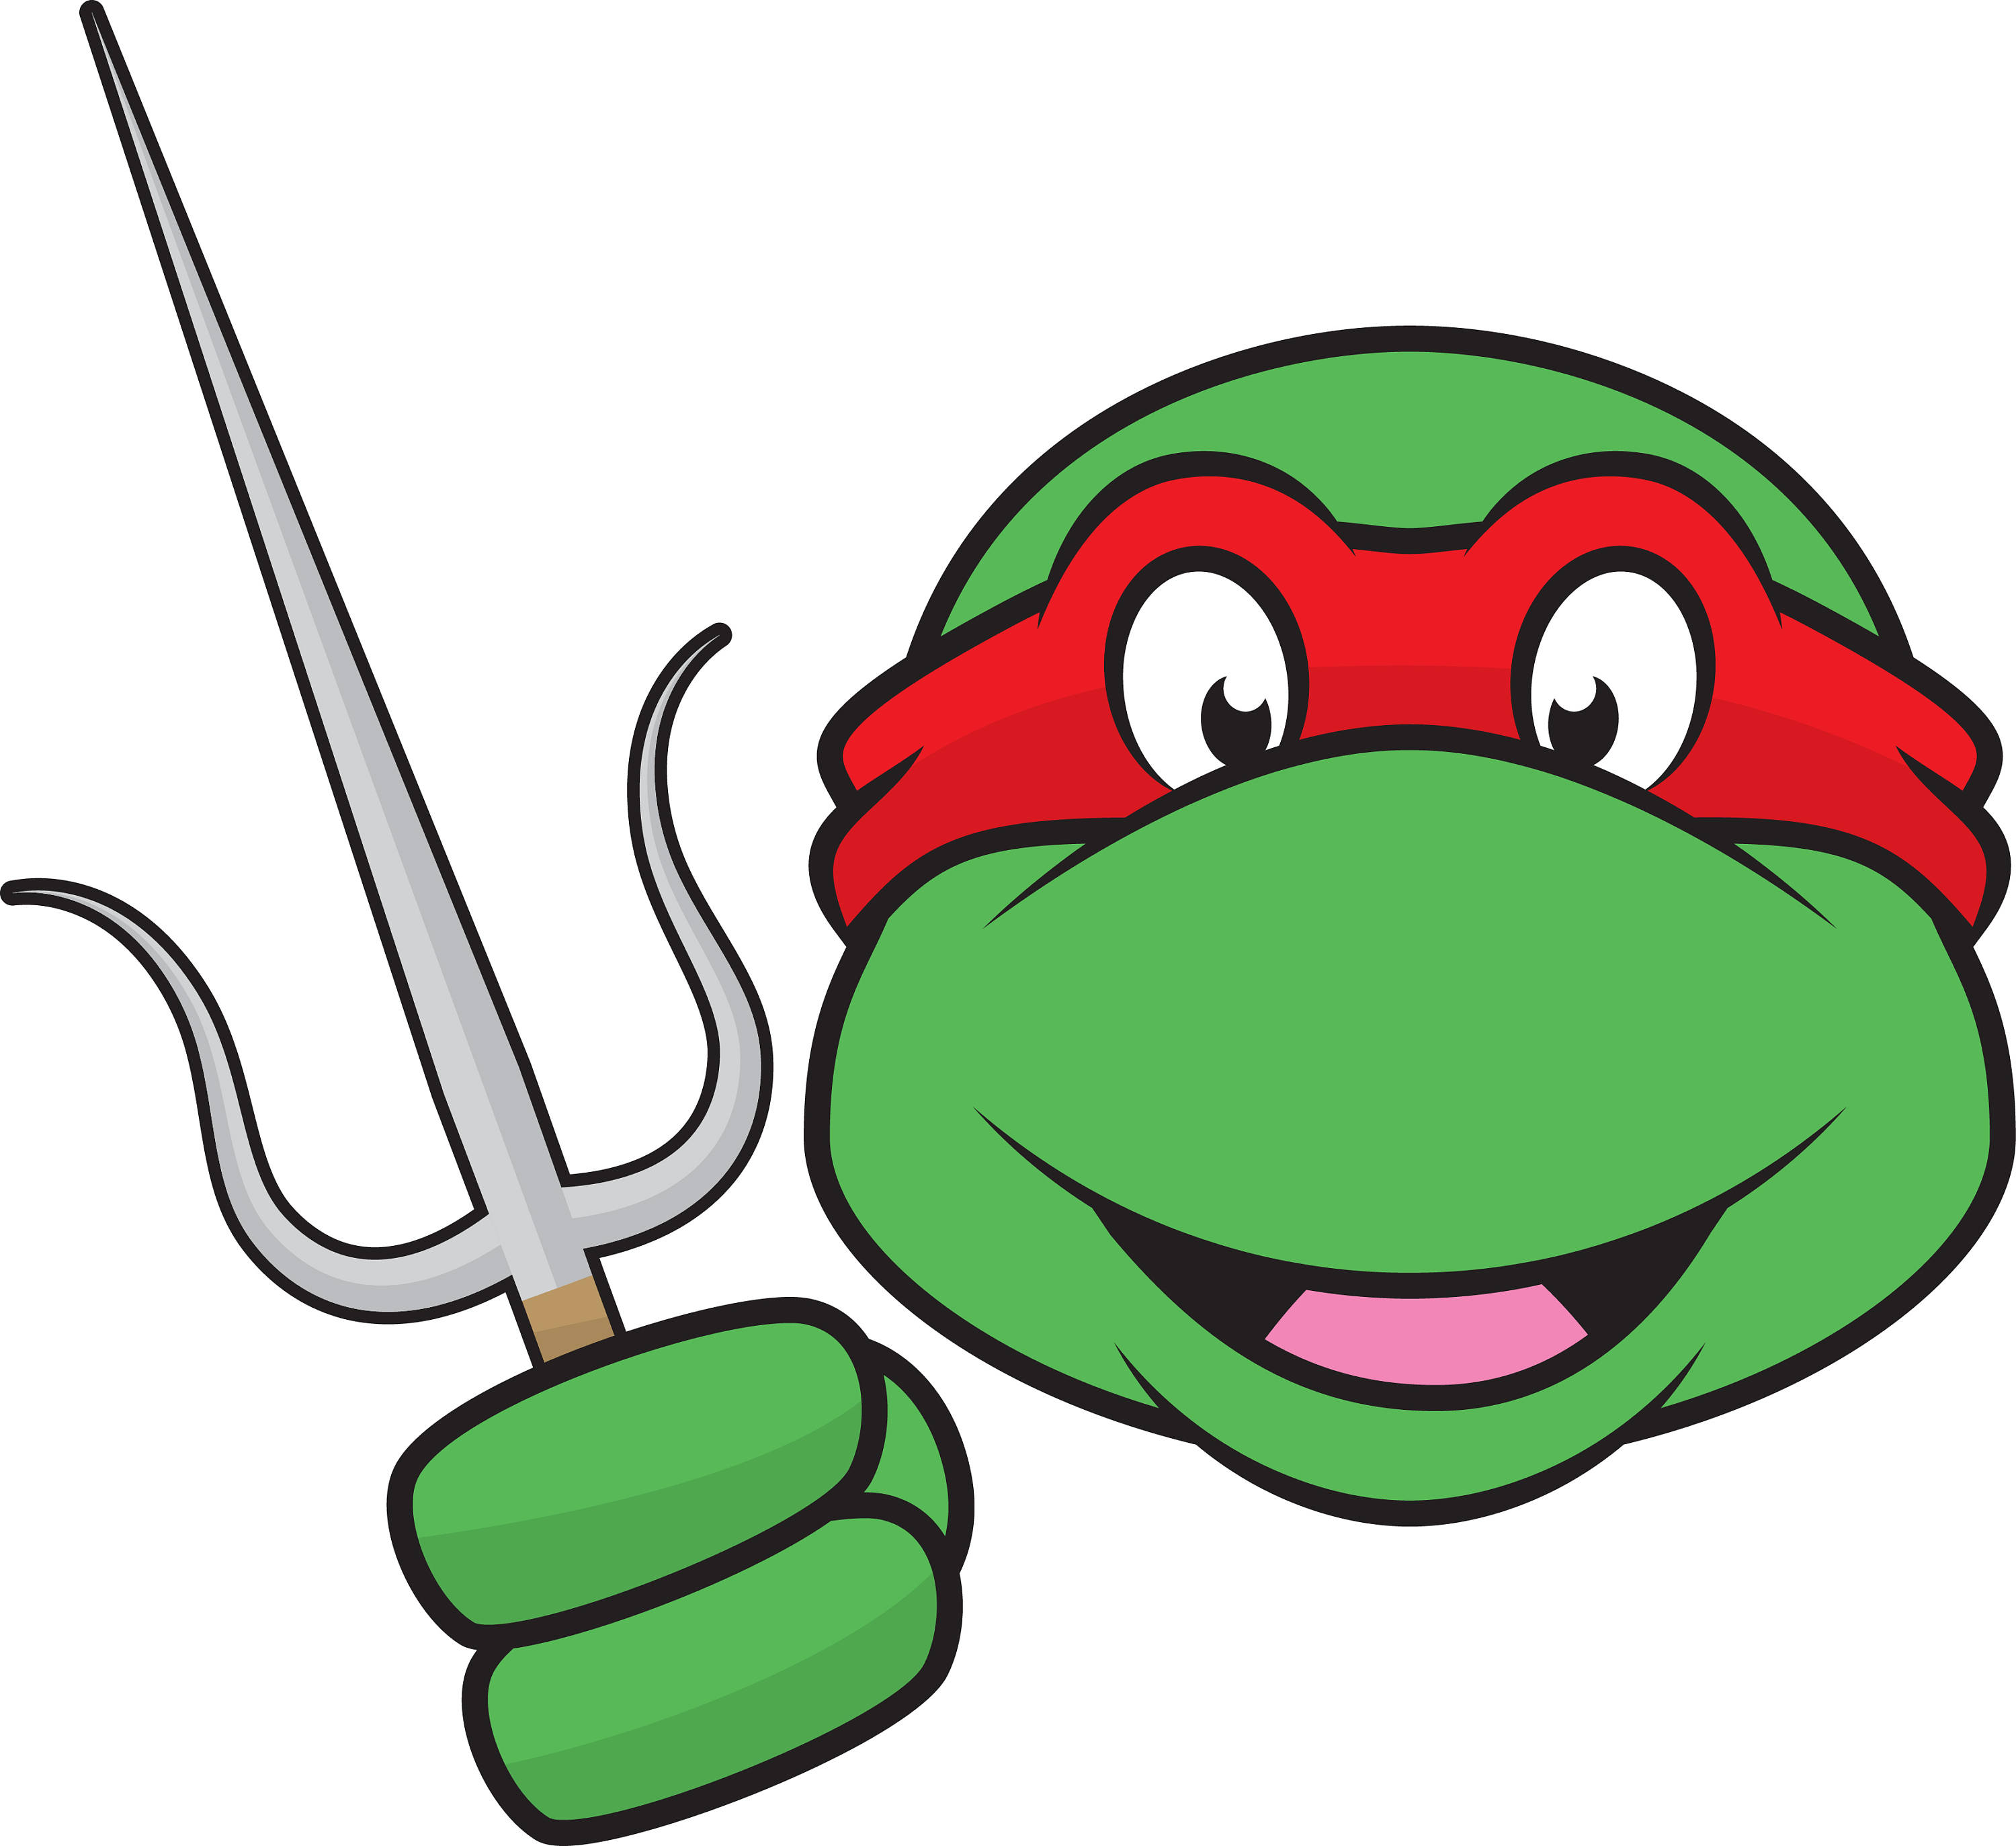 Download Ninja Turtle Face Silhouette at GetDrawings.com | Free for ...